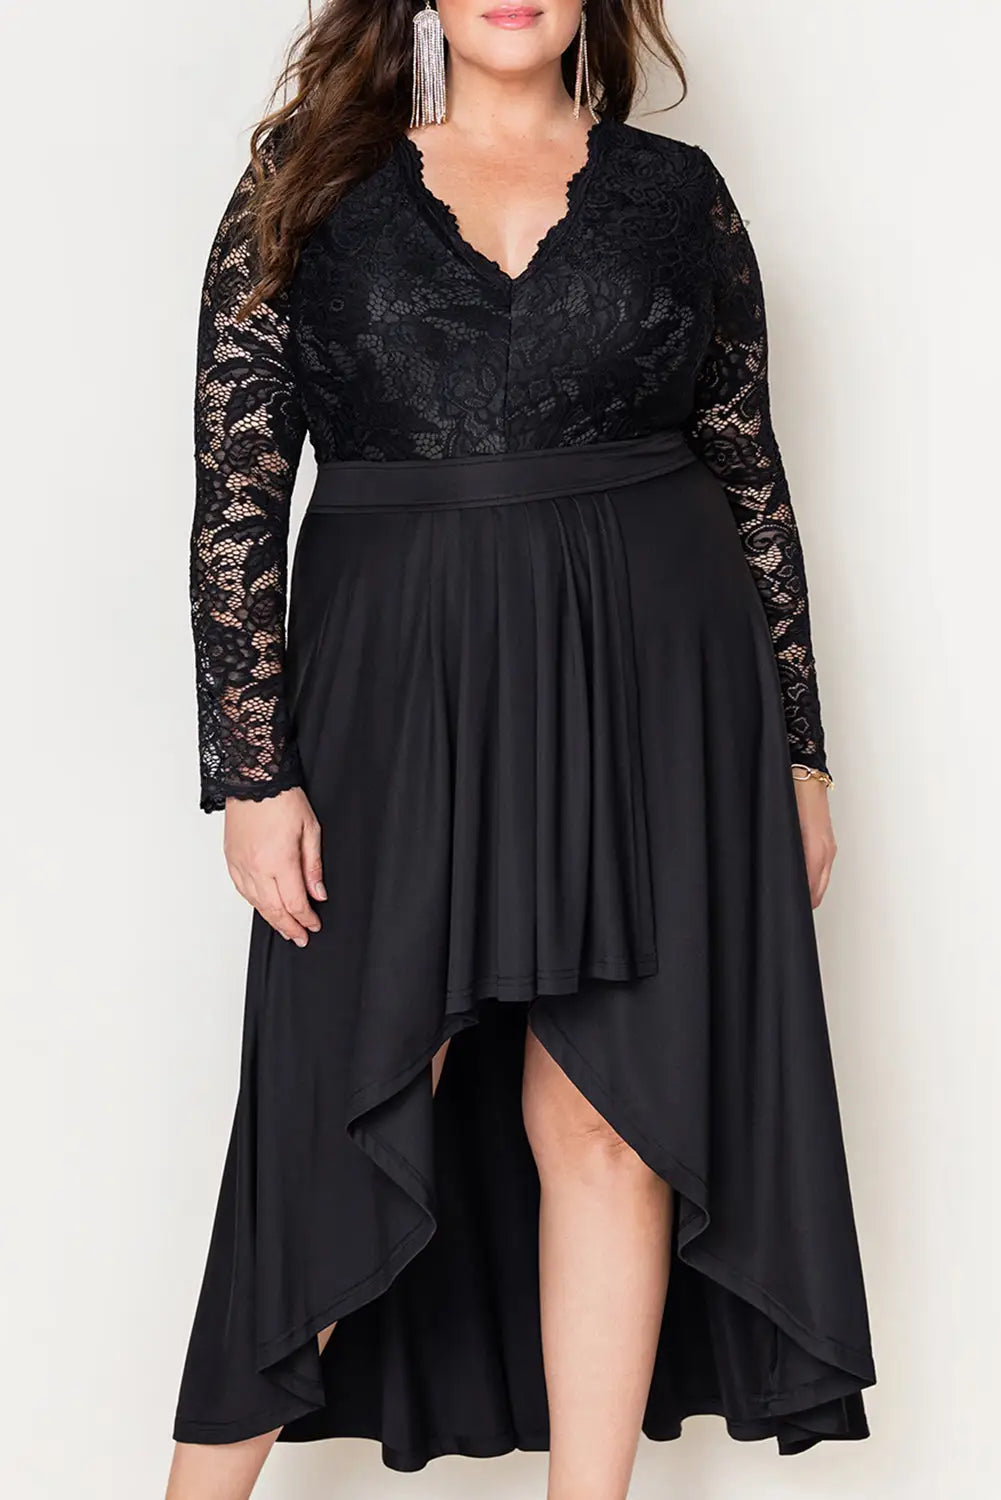 White plus size high-low lace contrast evening dress